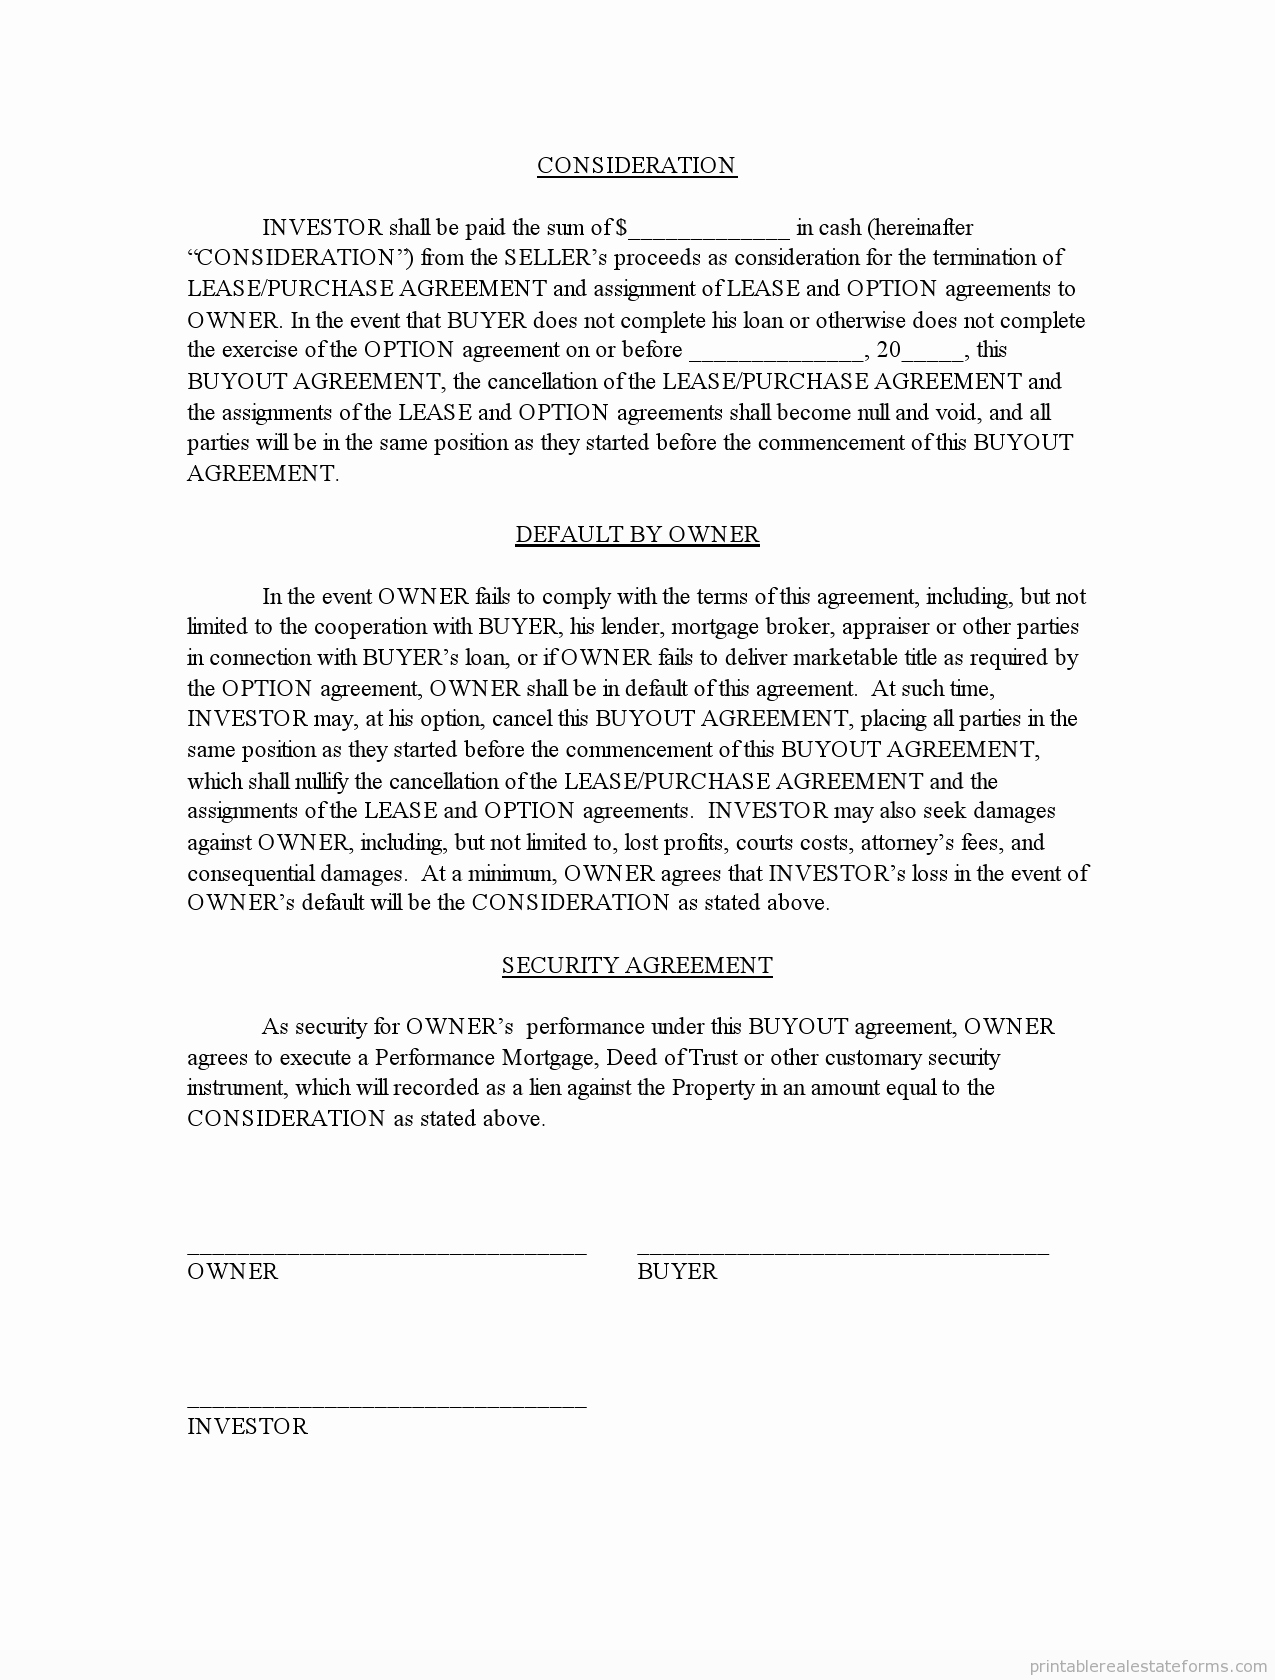 Buyout Agreement Template Fresh Free Buyout Agreement form